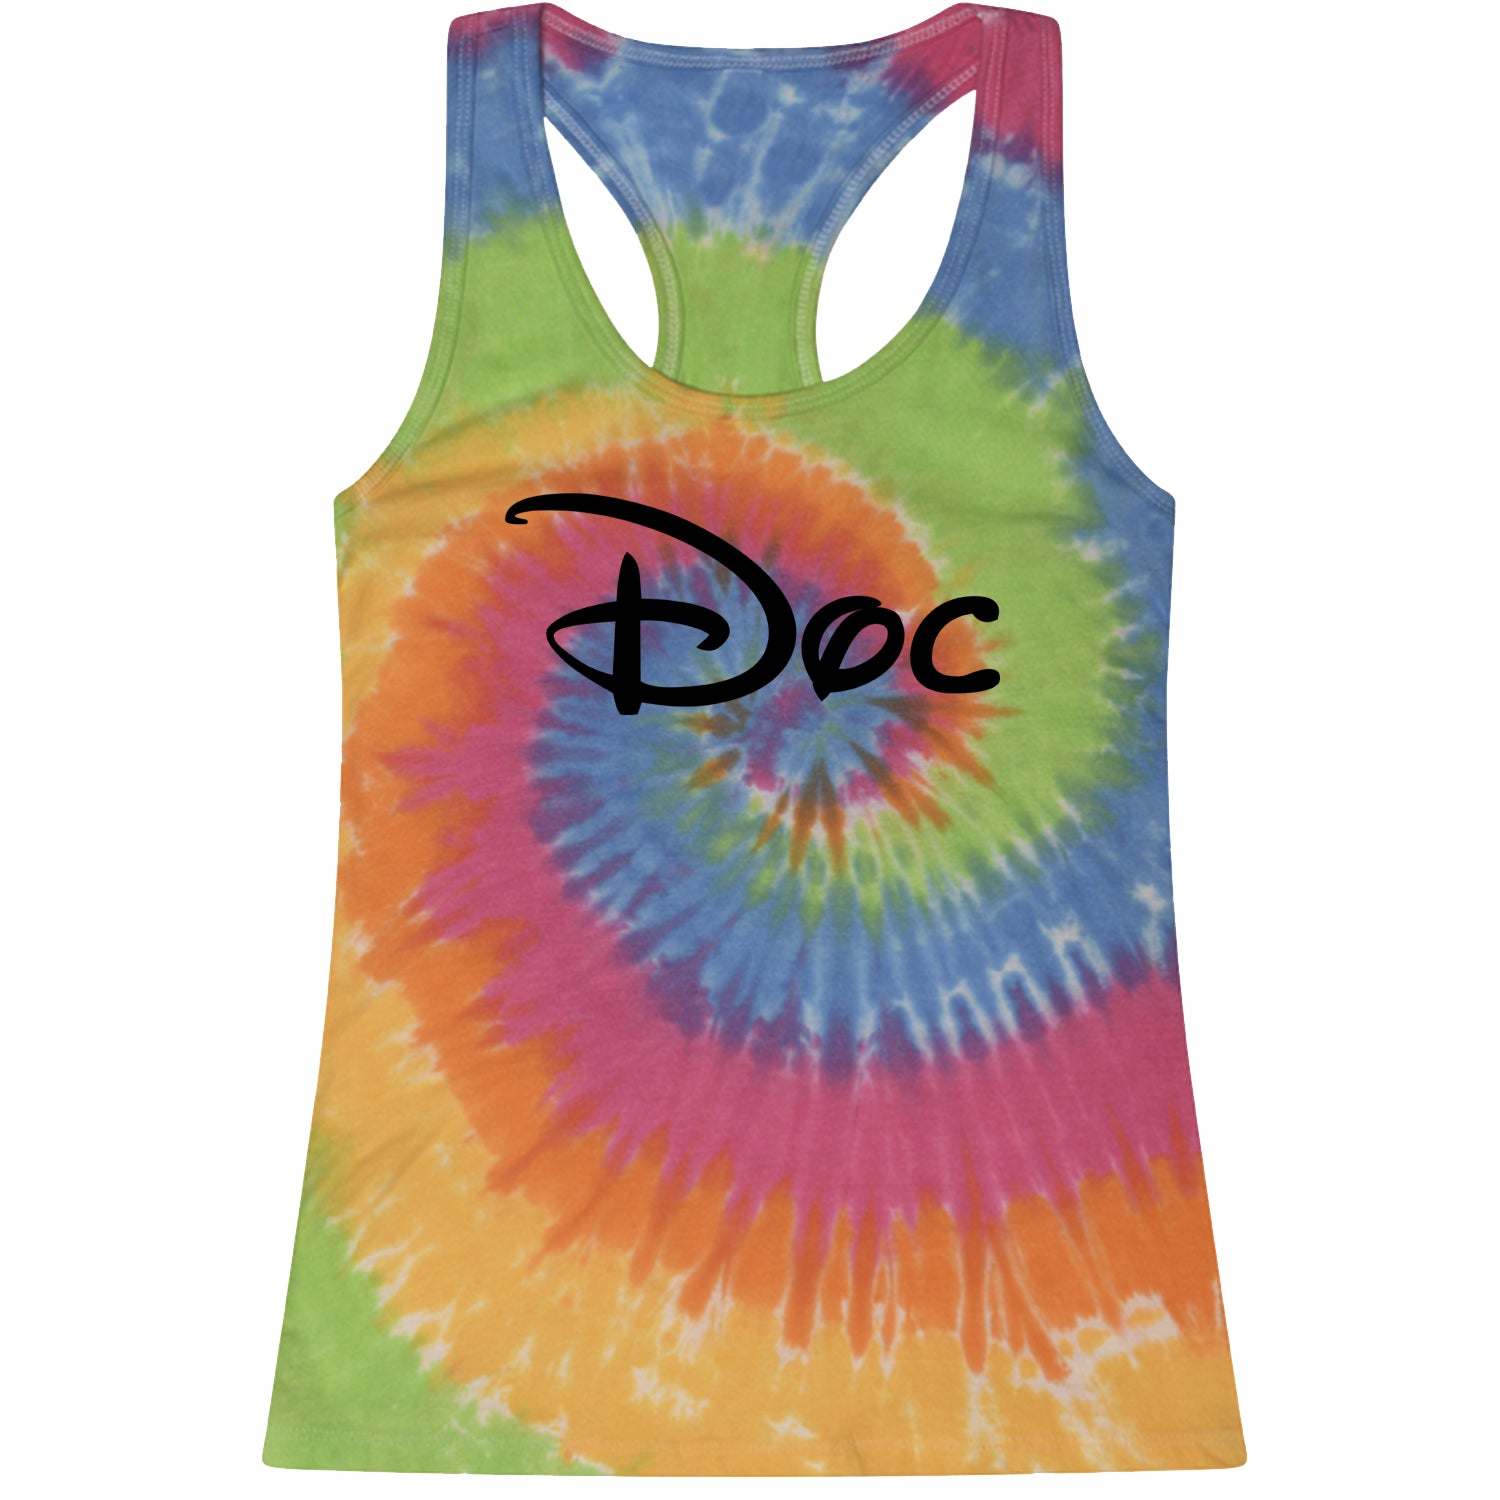 Doc - 7 Dwarfs Costume Racerback Tank Top for Women and, costume, dwarfs, group, halloween, matching, seven, snow, the, white by Expression Tees